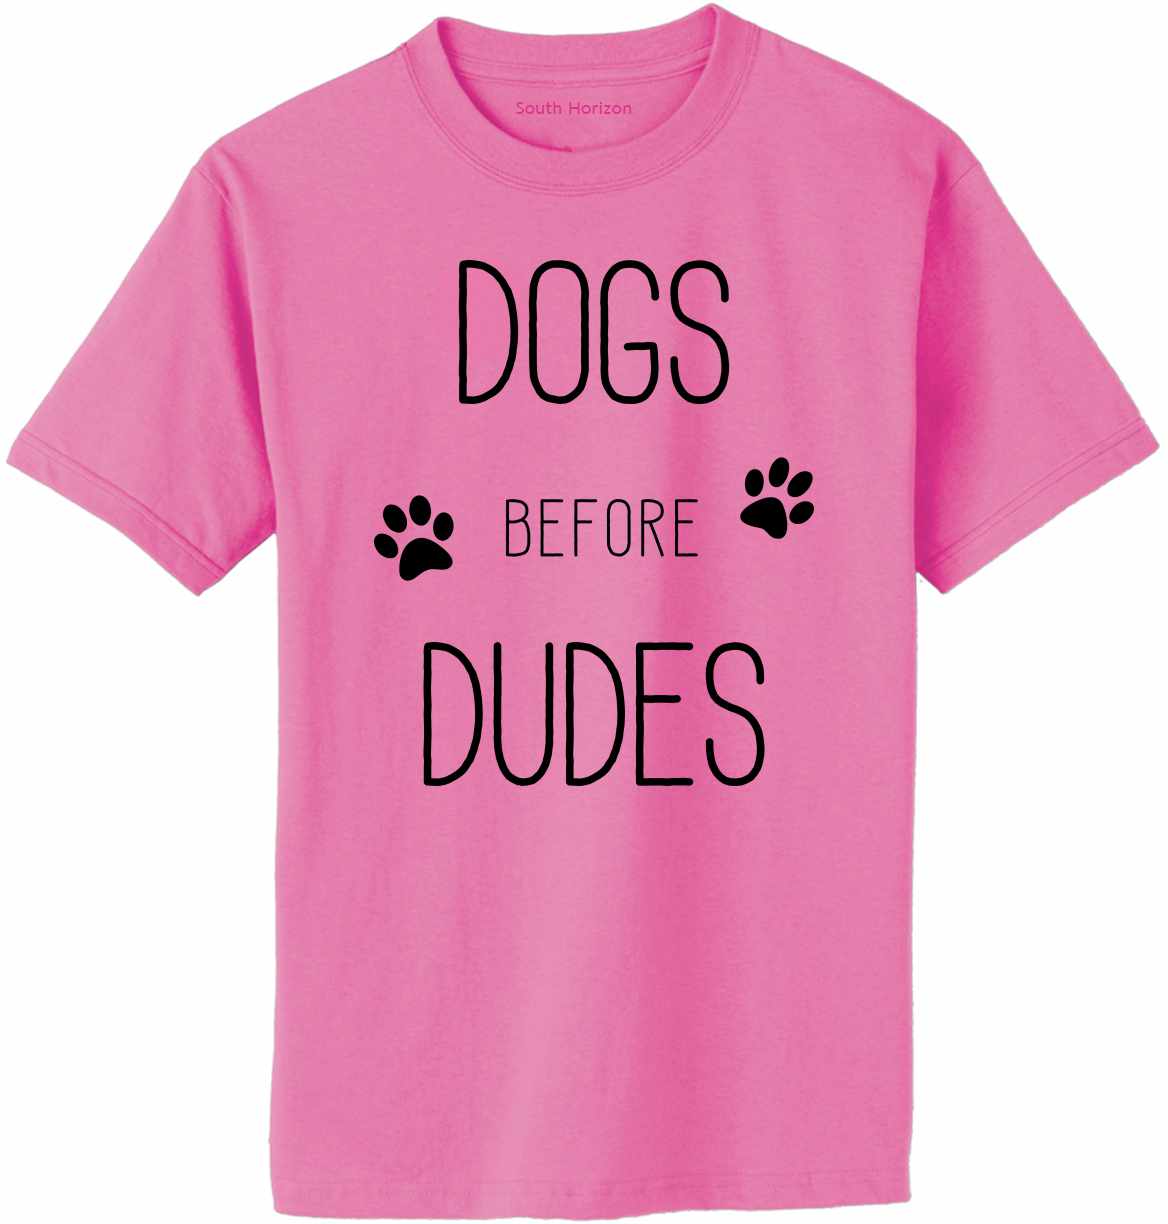 Dogs Before Dudes Adult T-Shirt (#1013-1)